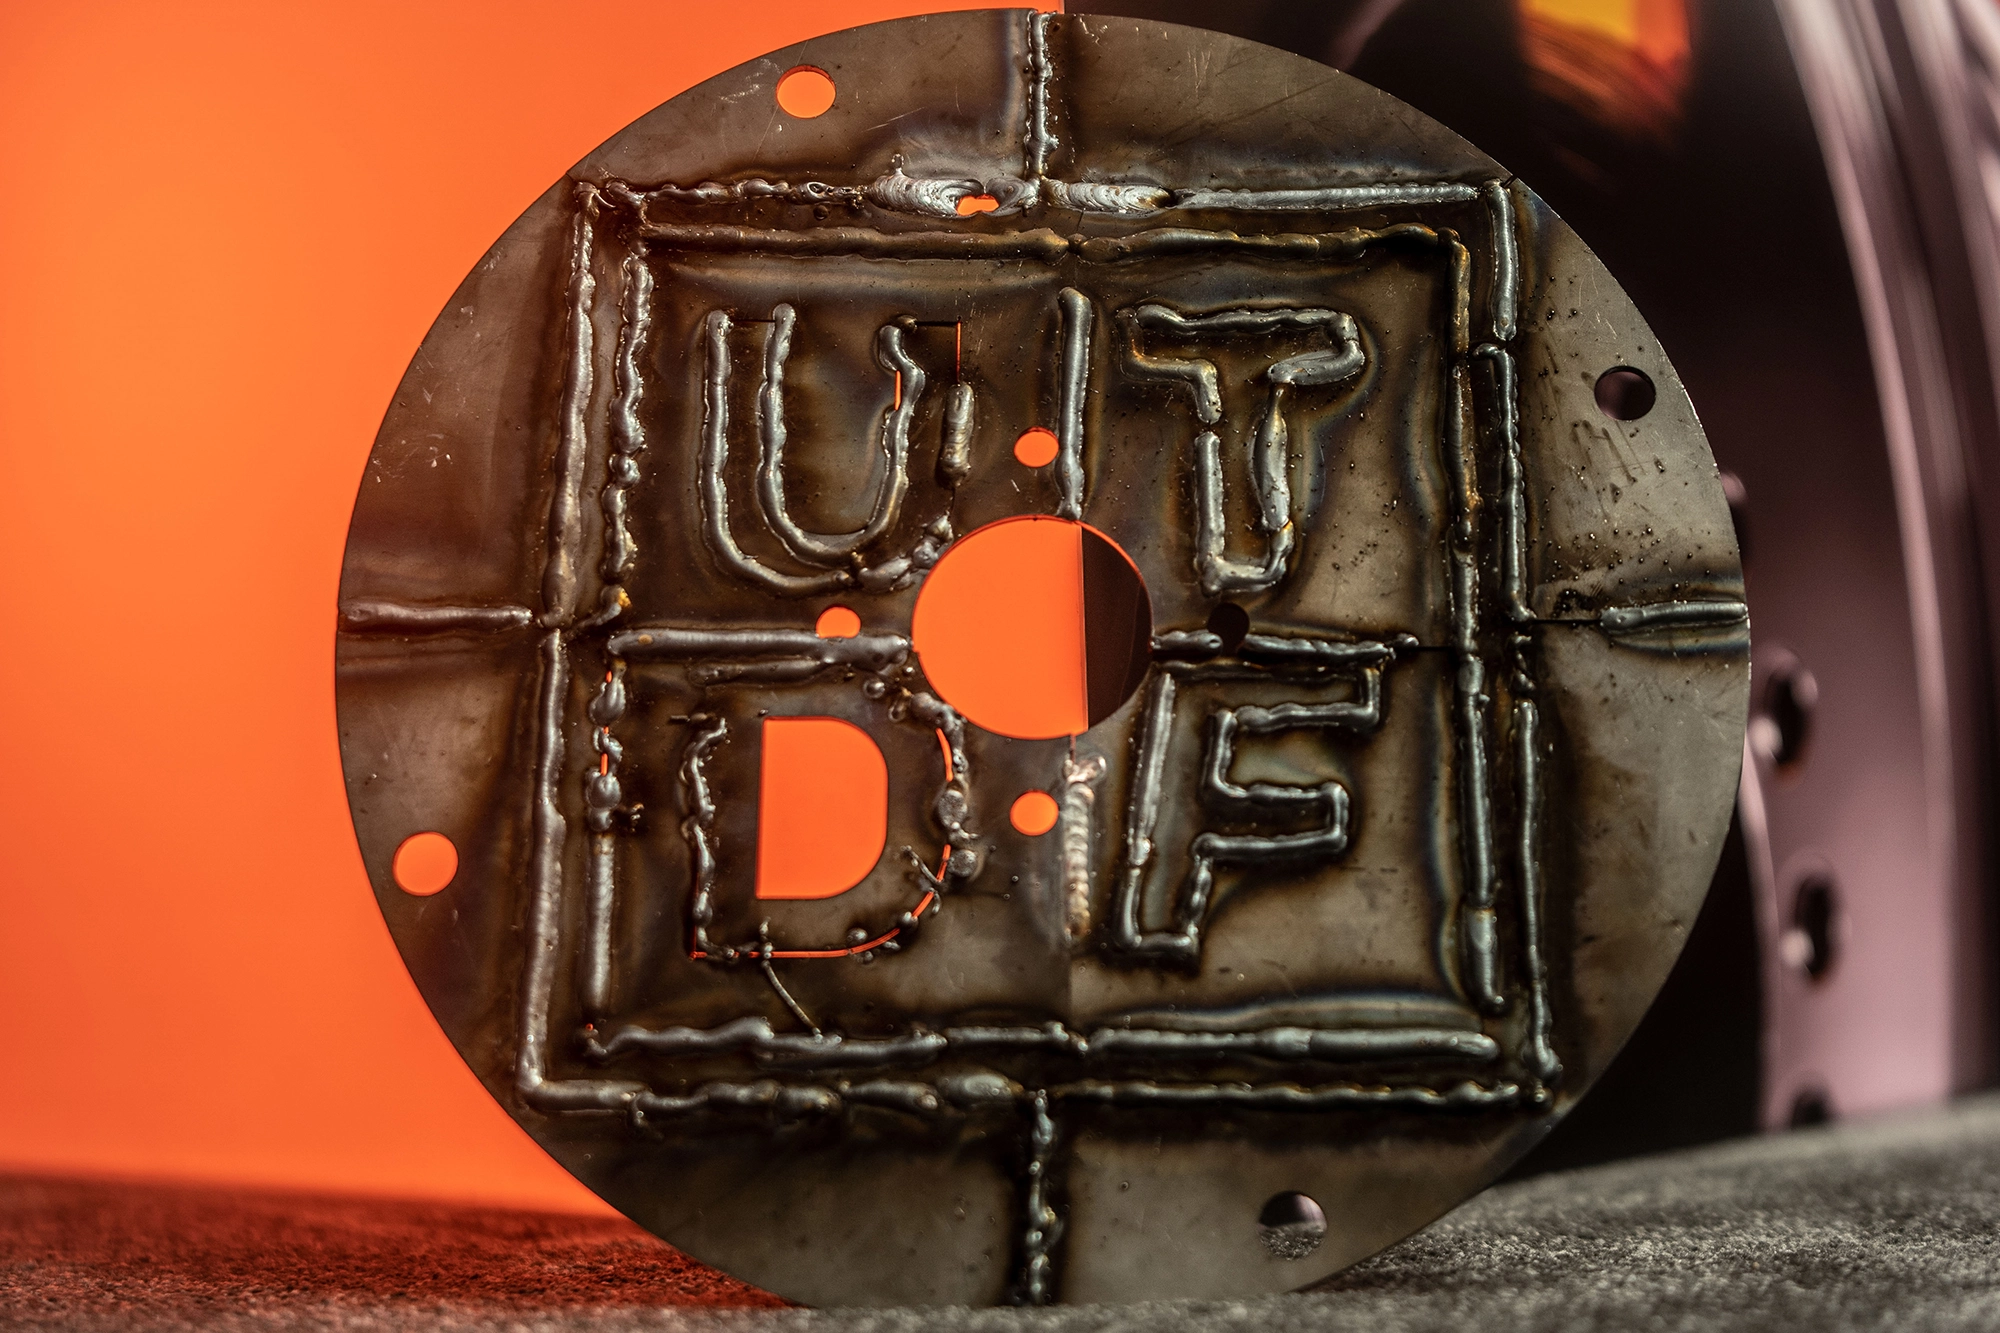 Disc with the Up To Date Festival logo welded at the event